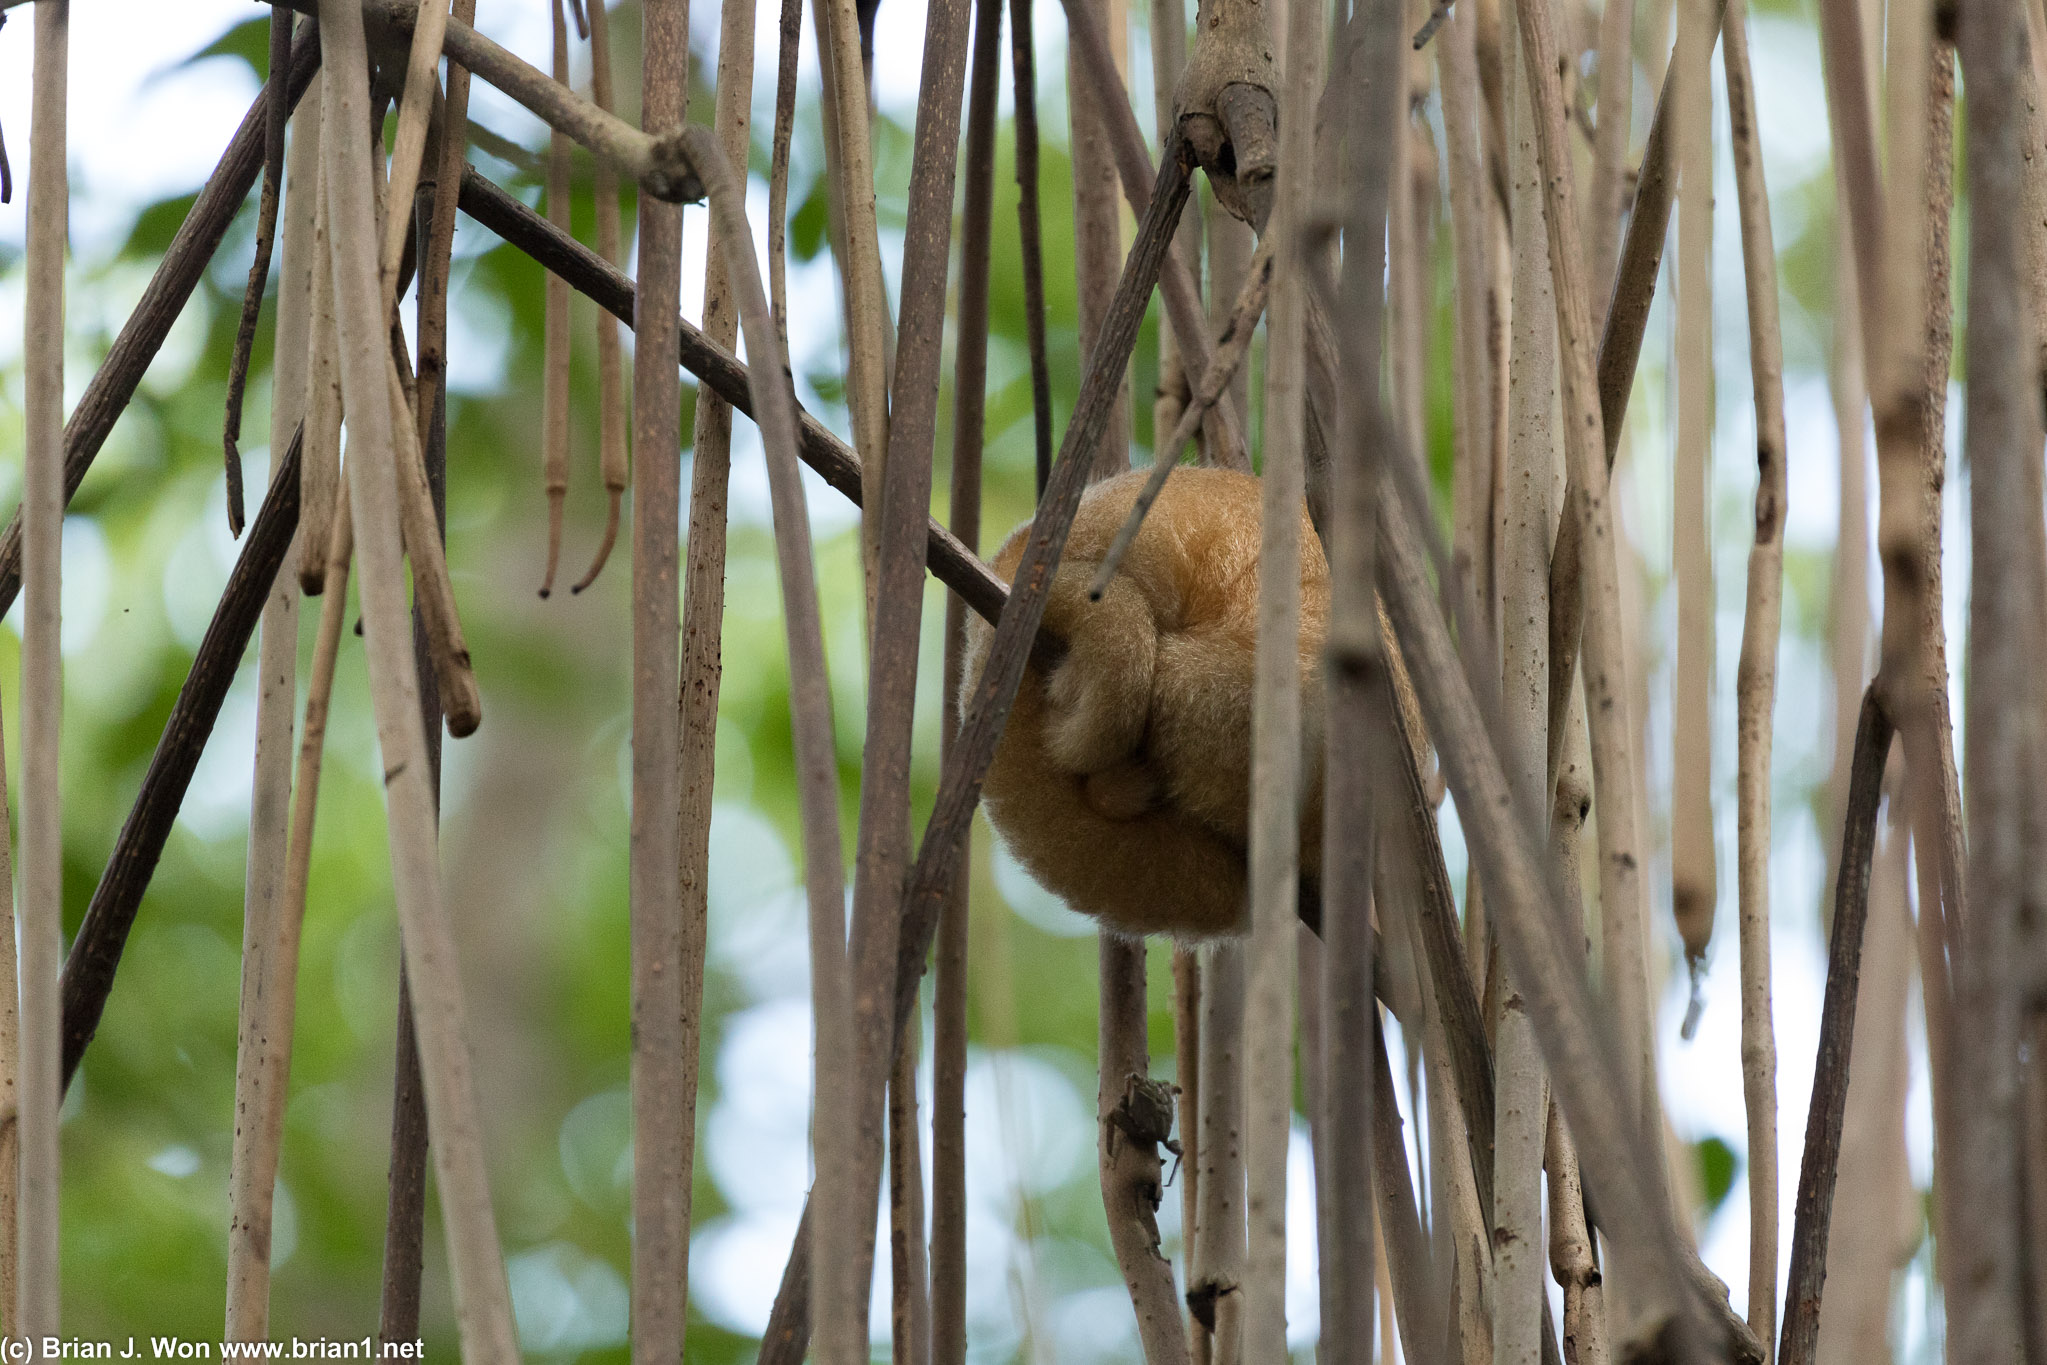 Silky anteater (I think).